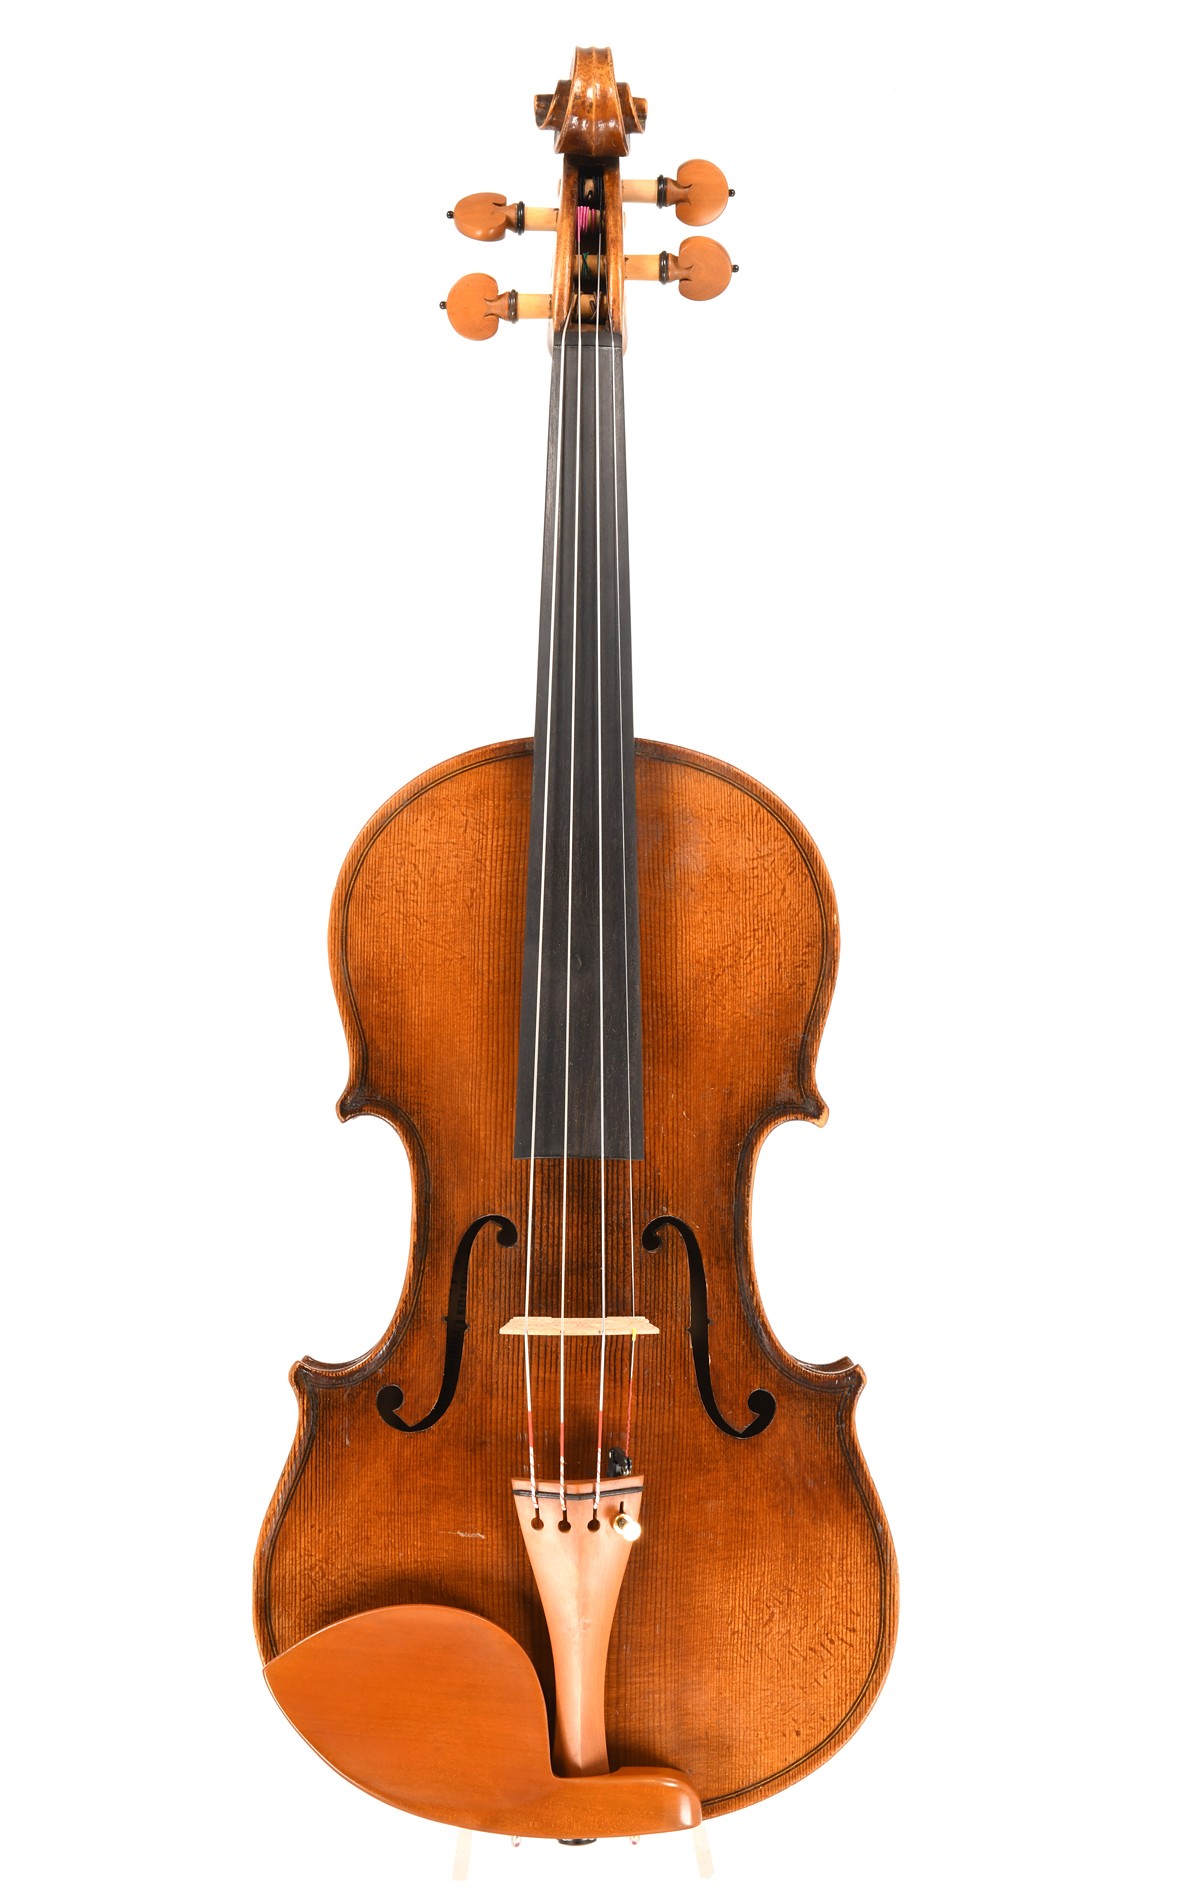 Conservatory violin, made in Germany